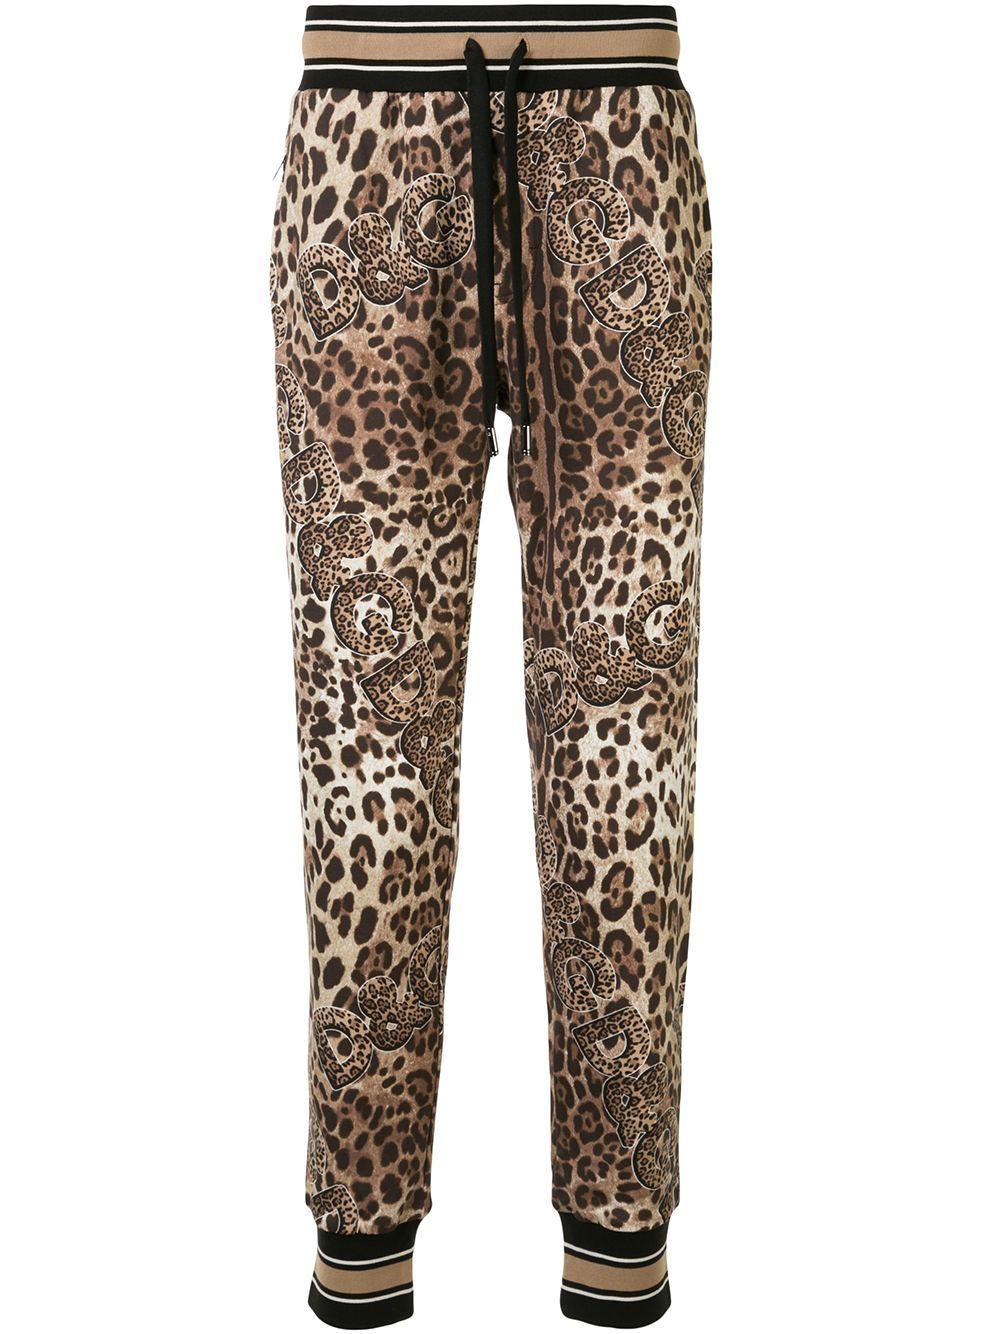 Dolce & Gabbana Synthetic Leopard-print Track Pants in Brown for Men - Lyst